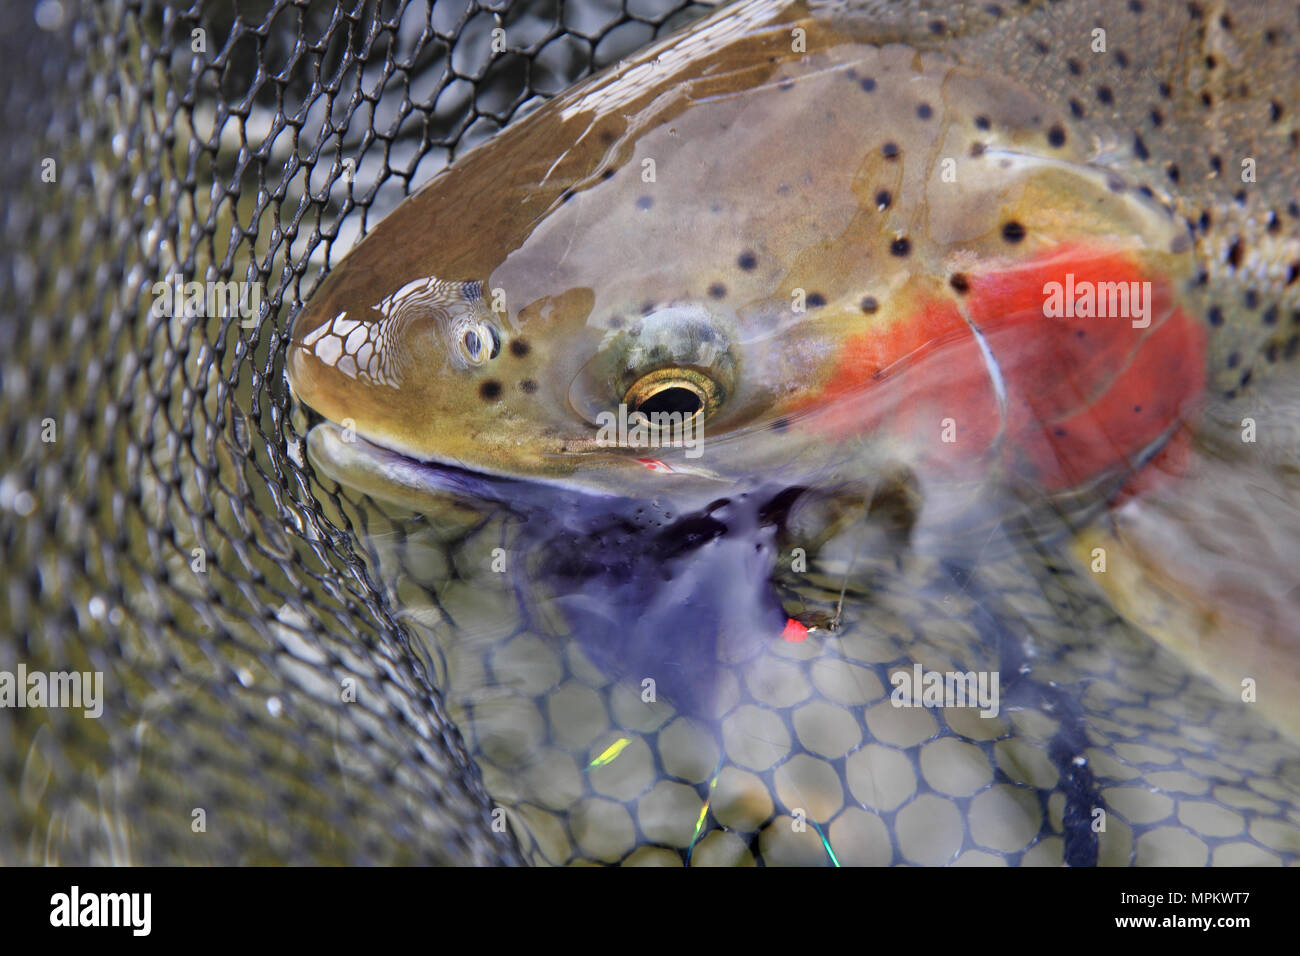 freshly caught steelhead trout in a net with pink lure in mouth closeup Stock Photo